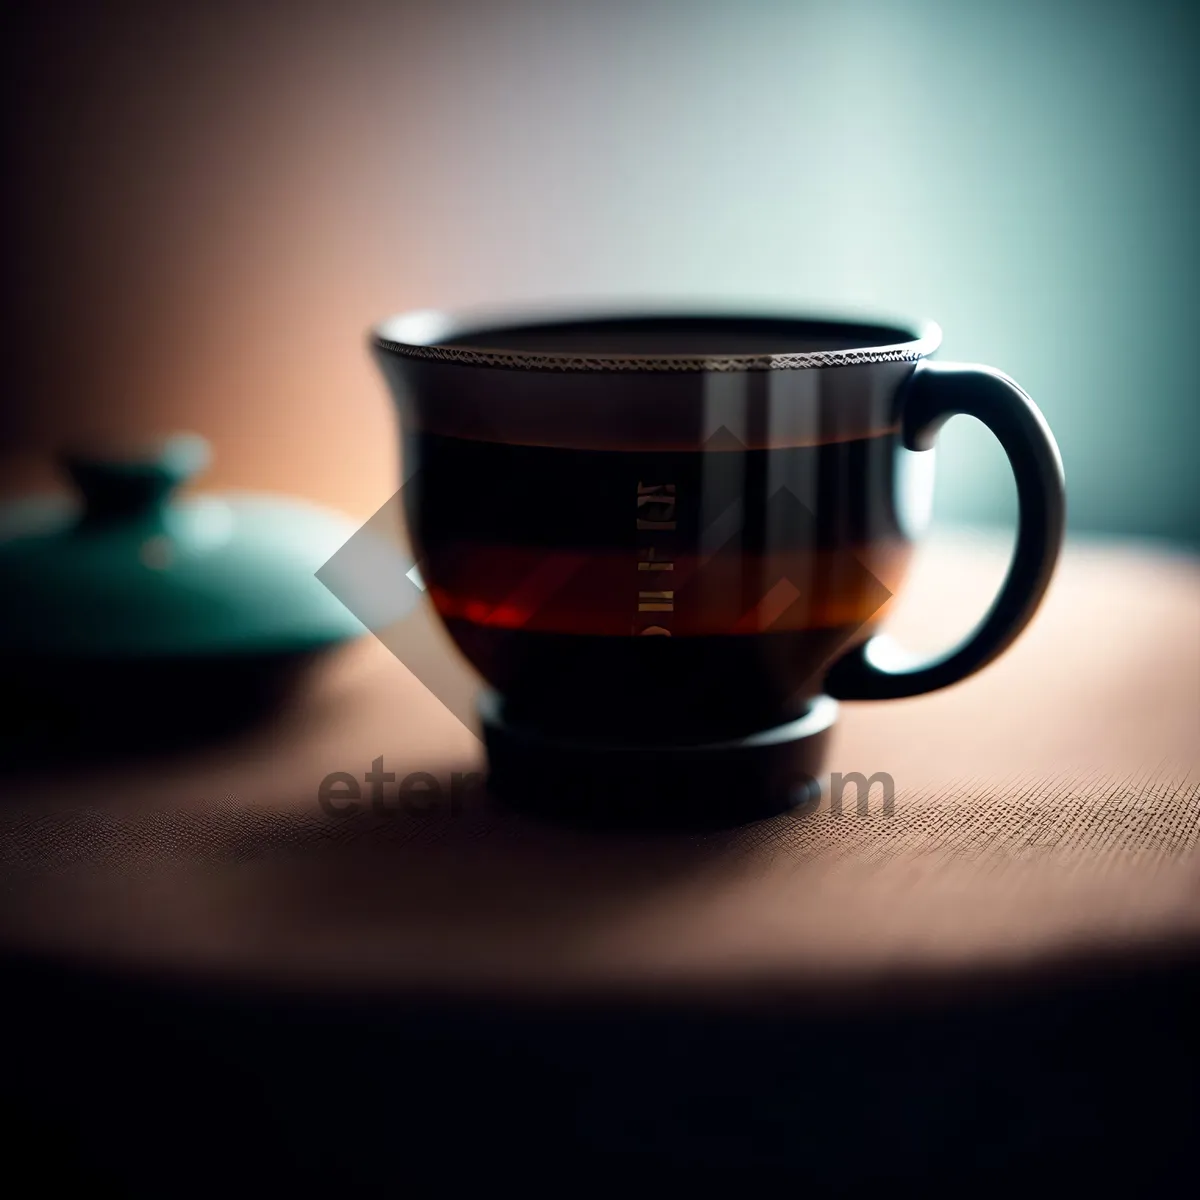 Picture of Ceramic Coffee Mug with Saucer, Breakfast Beverage in the Morning